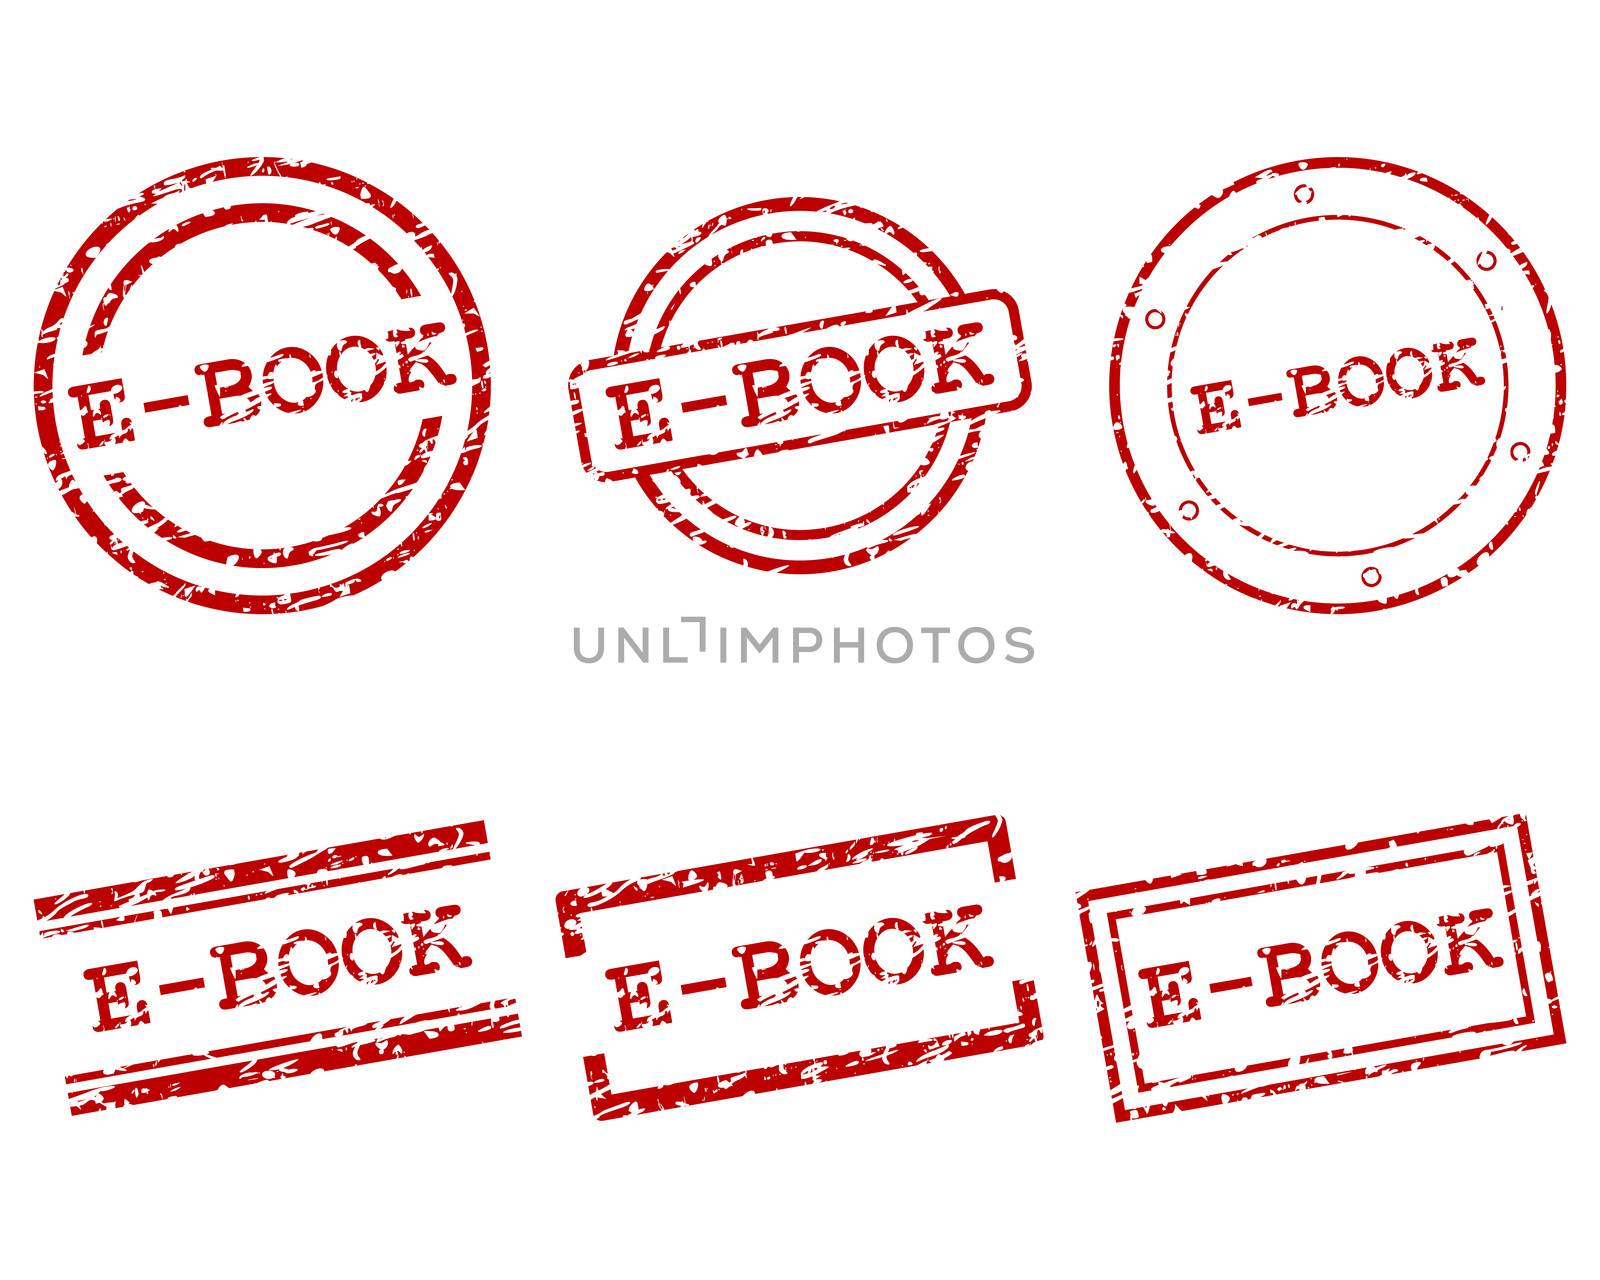 E-book stamps by rbiedermann